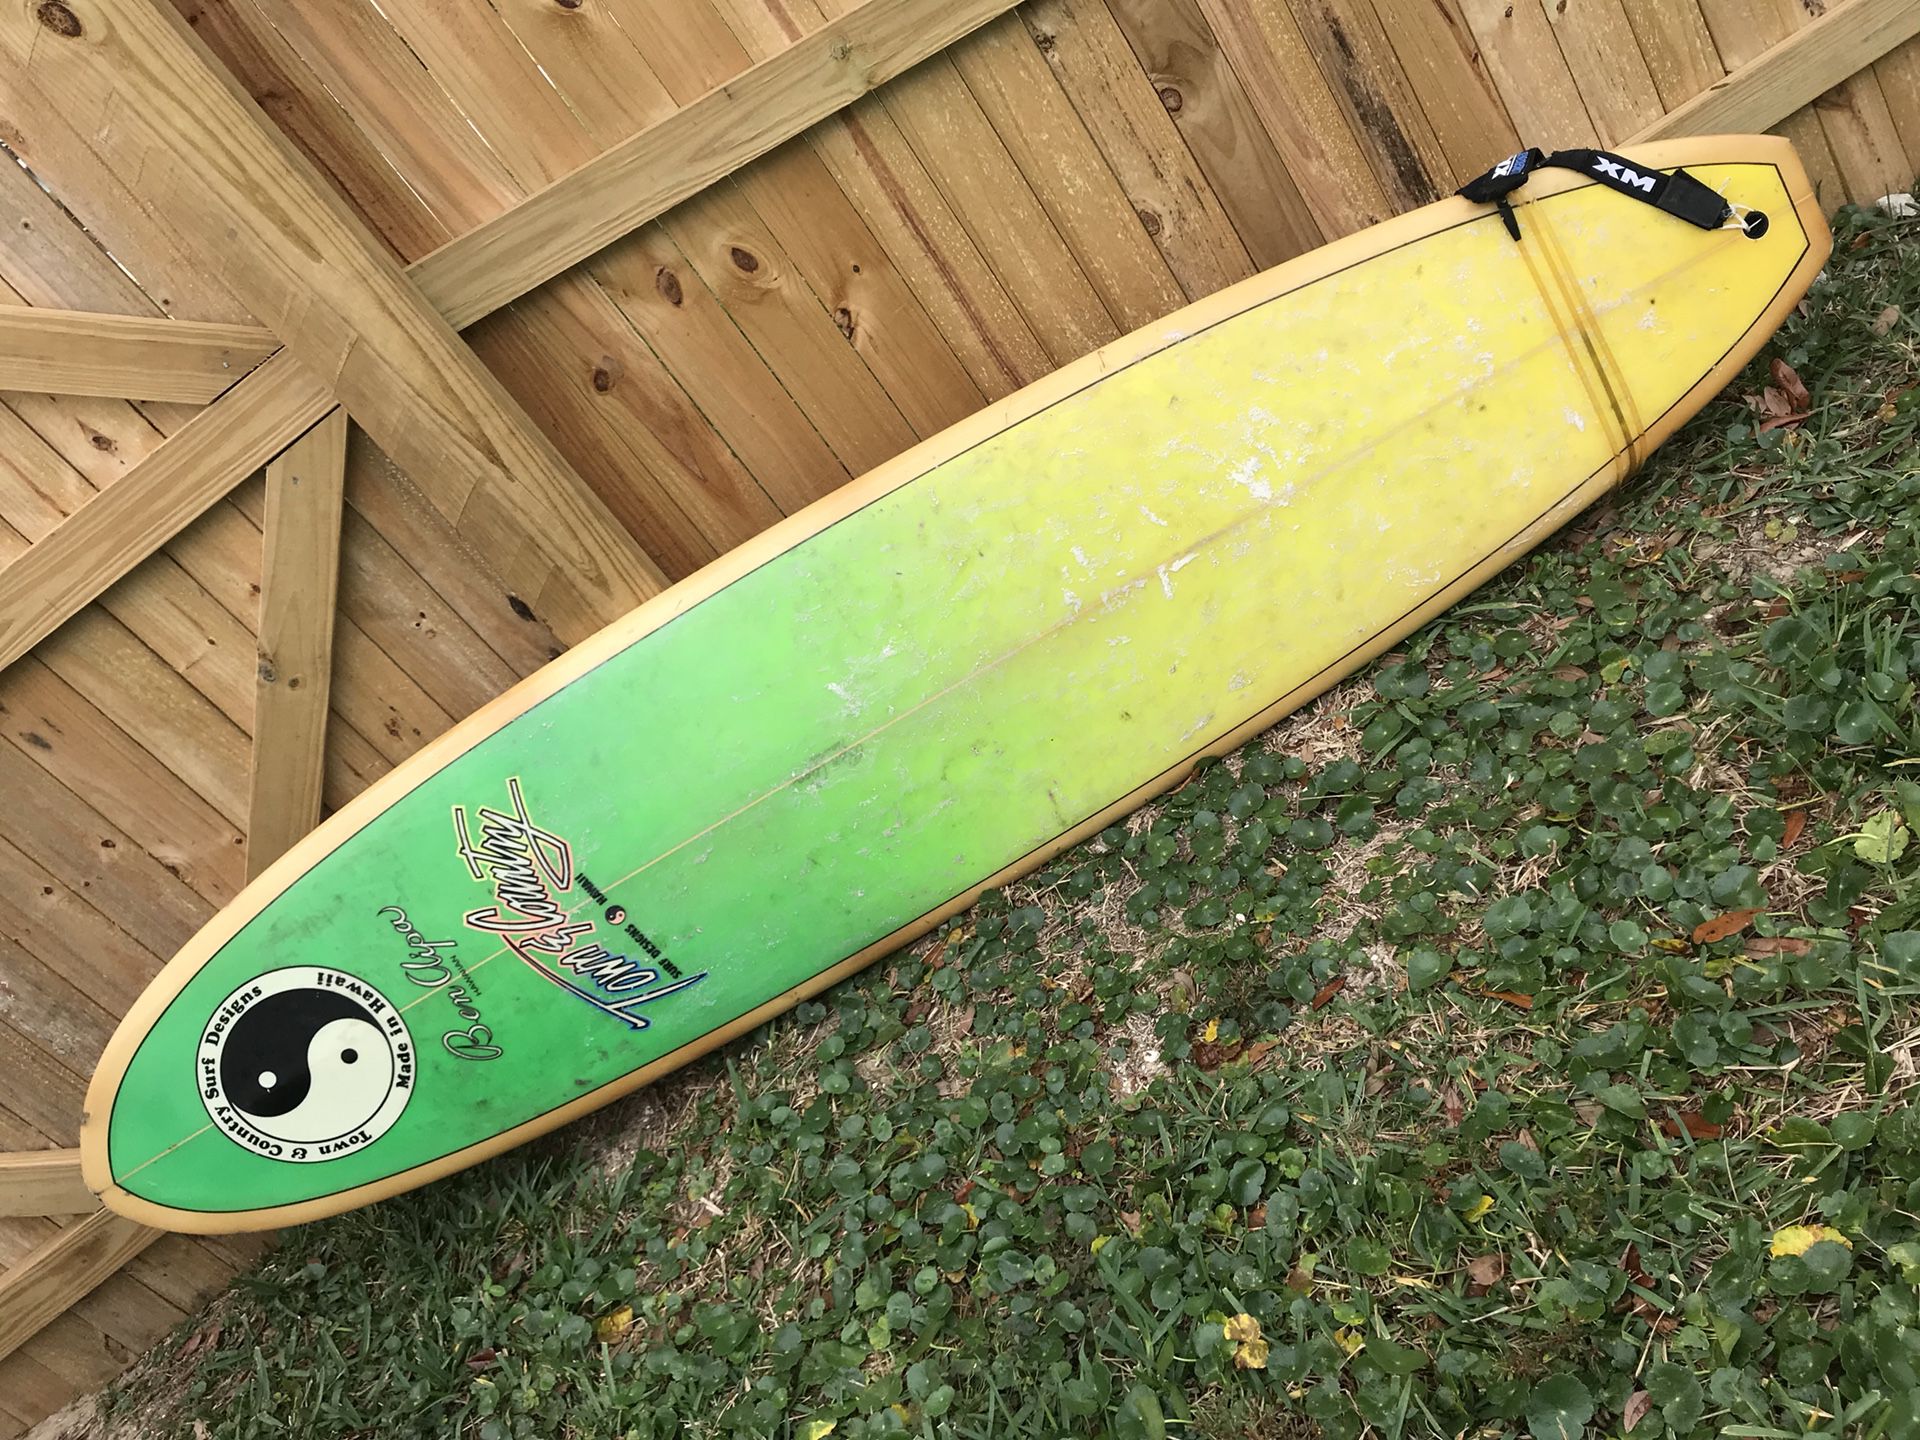 NEW限定品】 COUNTRY Surfboards Hawaii Vintage サーフボード